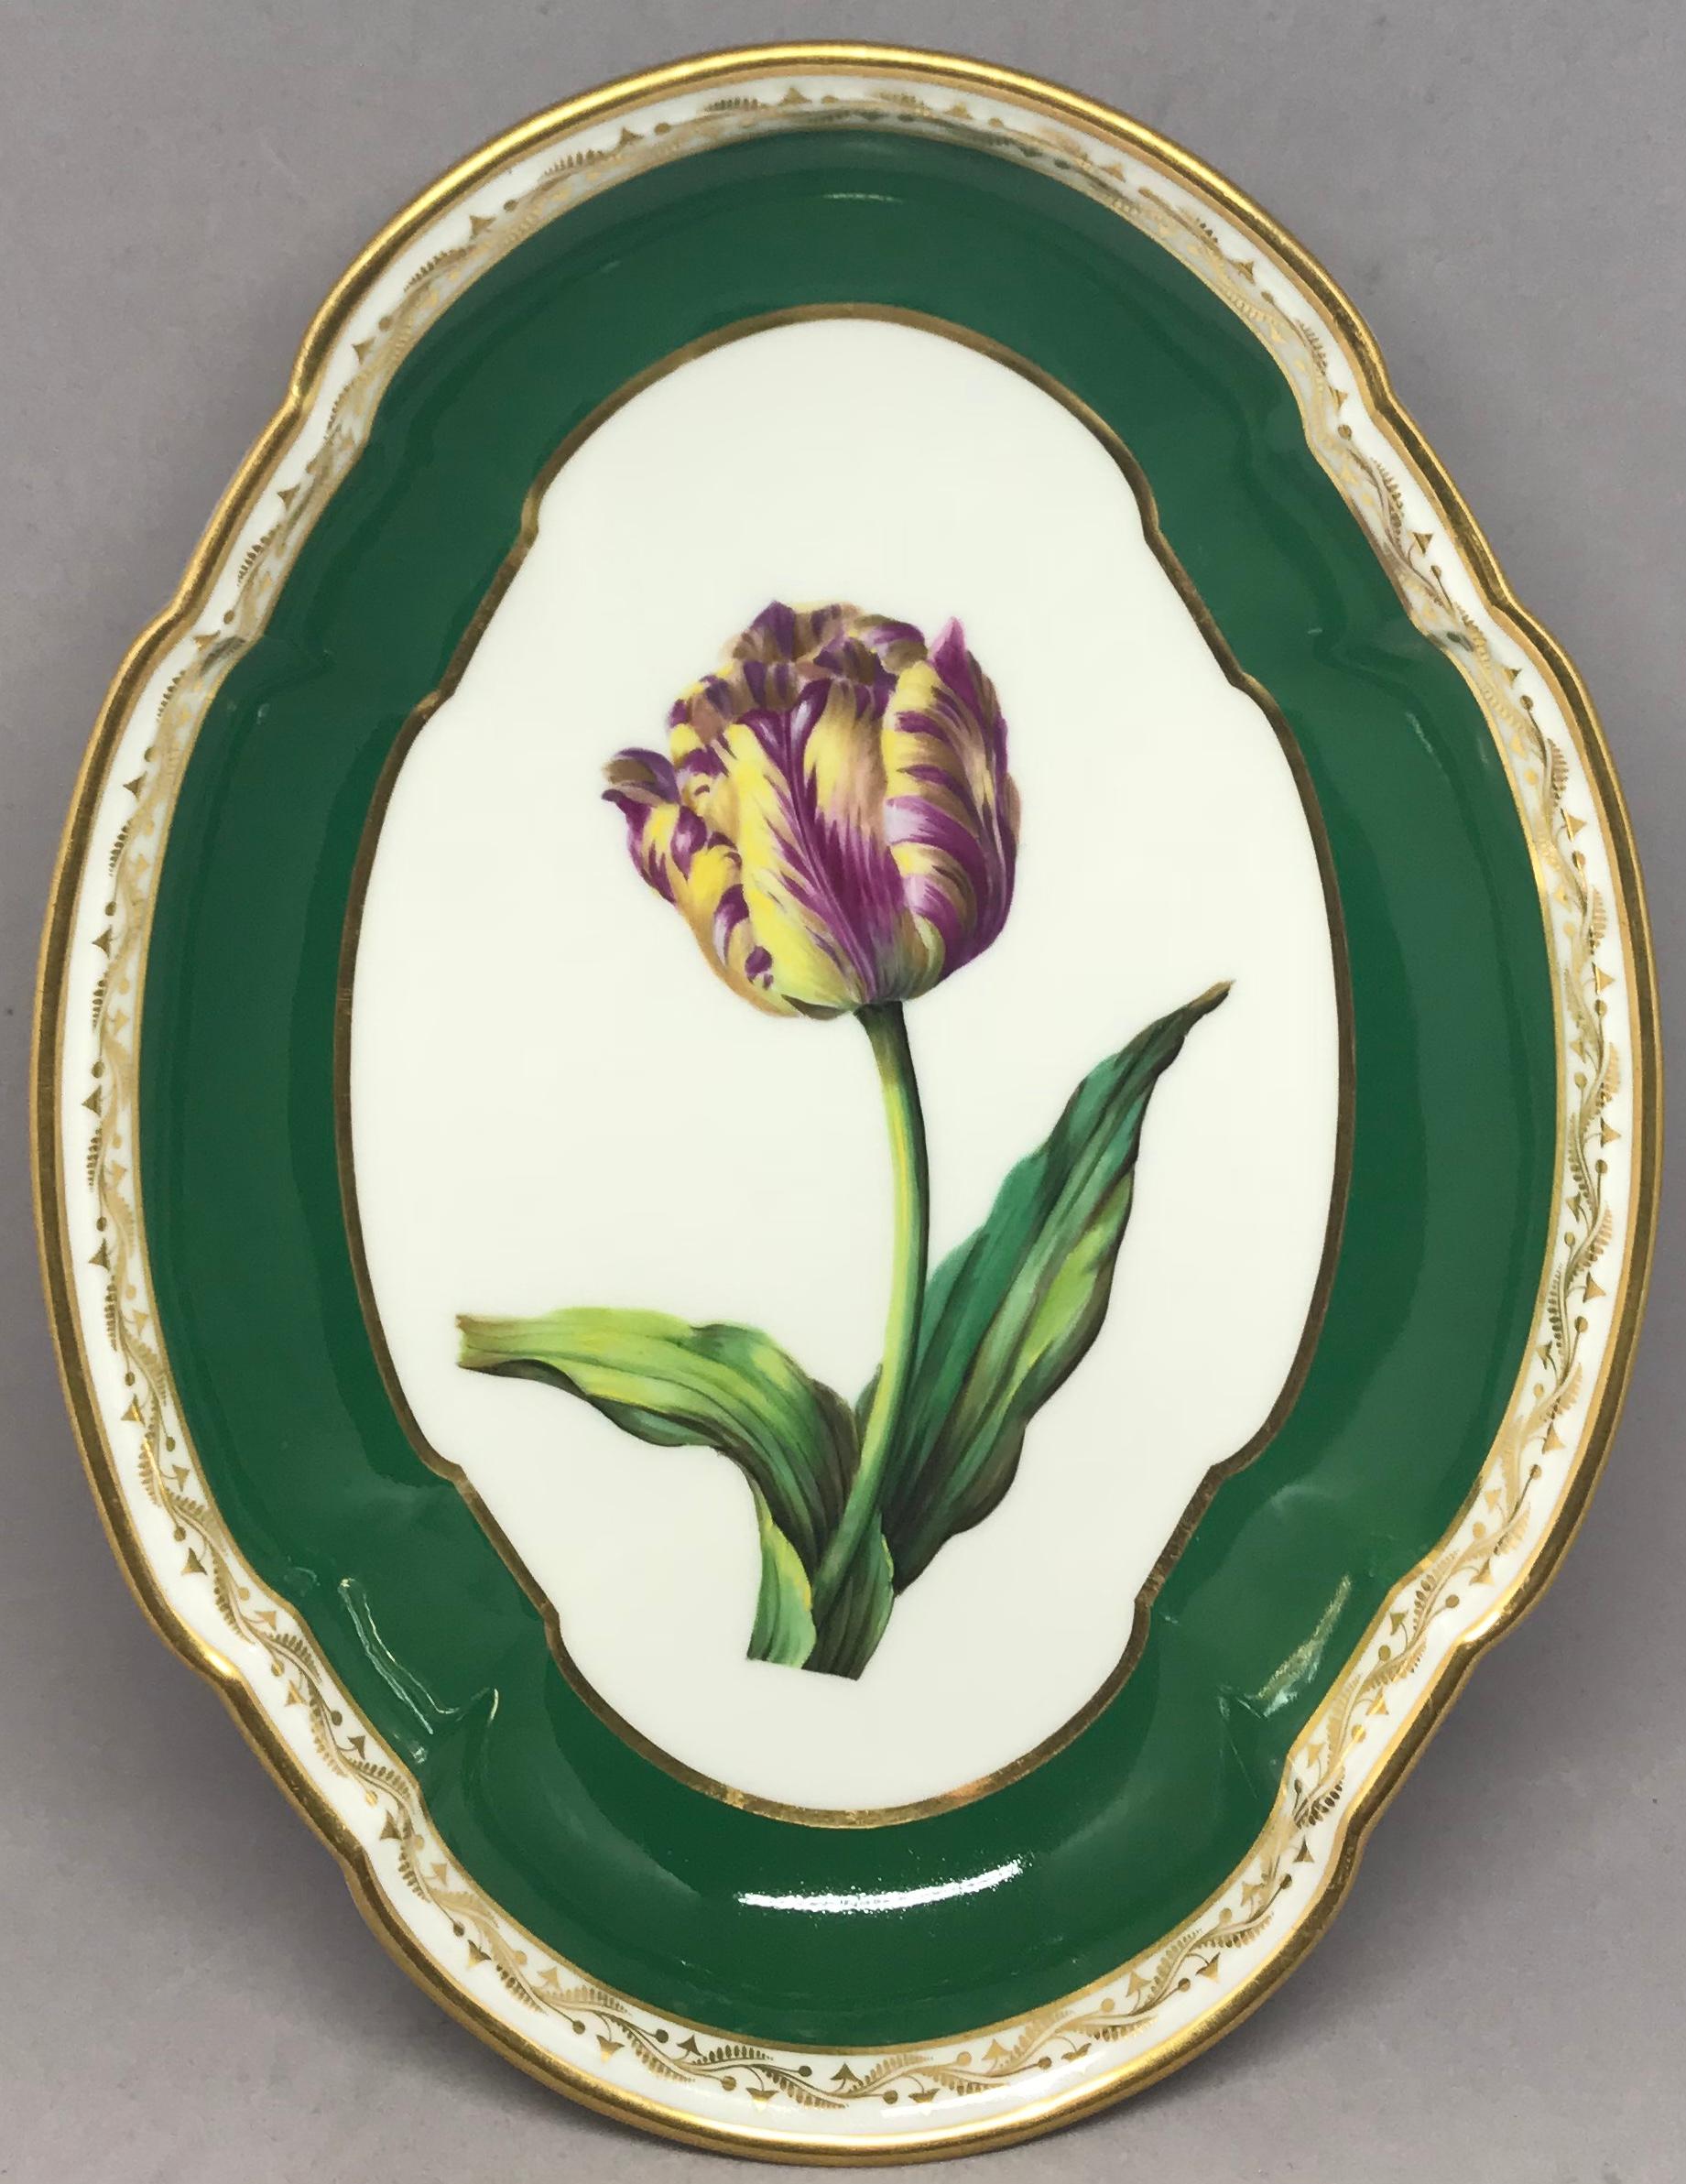 Purple and green gilt porcelain tulip bowl. Nast manufacture hard paste French porcelain serving dish with botanical painted tulip specimen identified on the reverse with strong viridian green glaze interior border and Fine gilt filigree border. Red